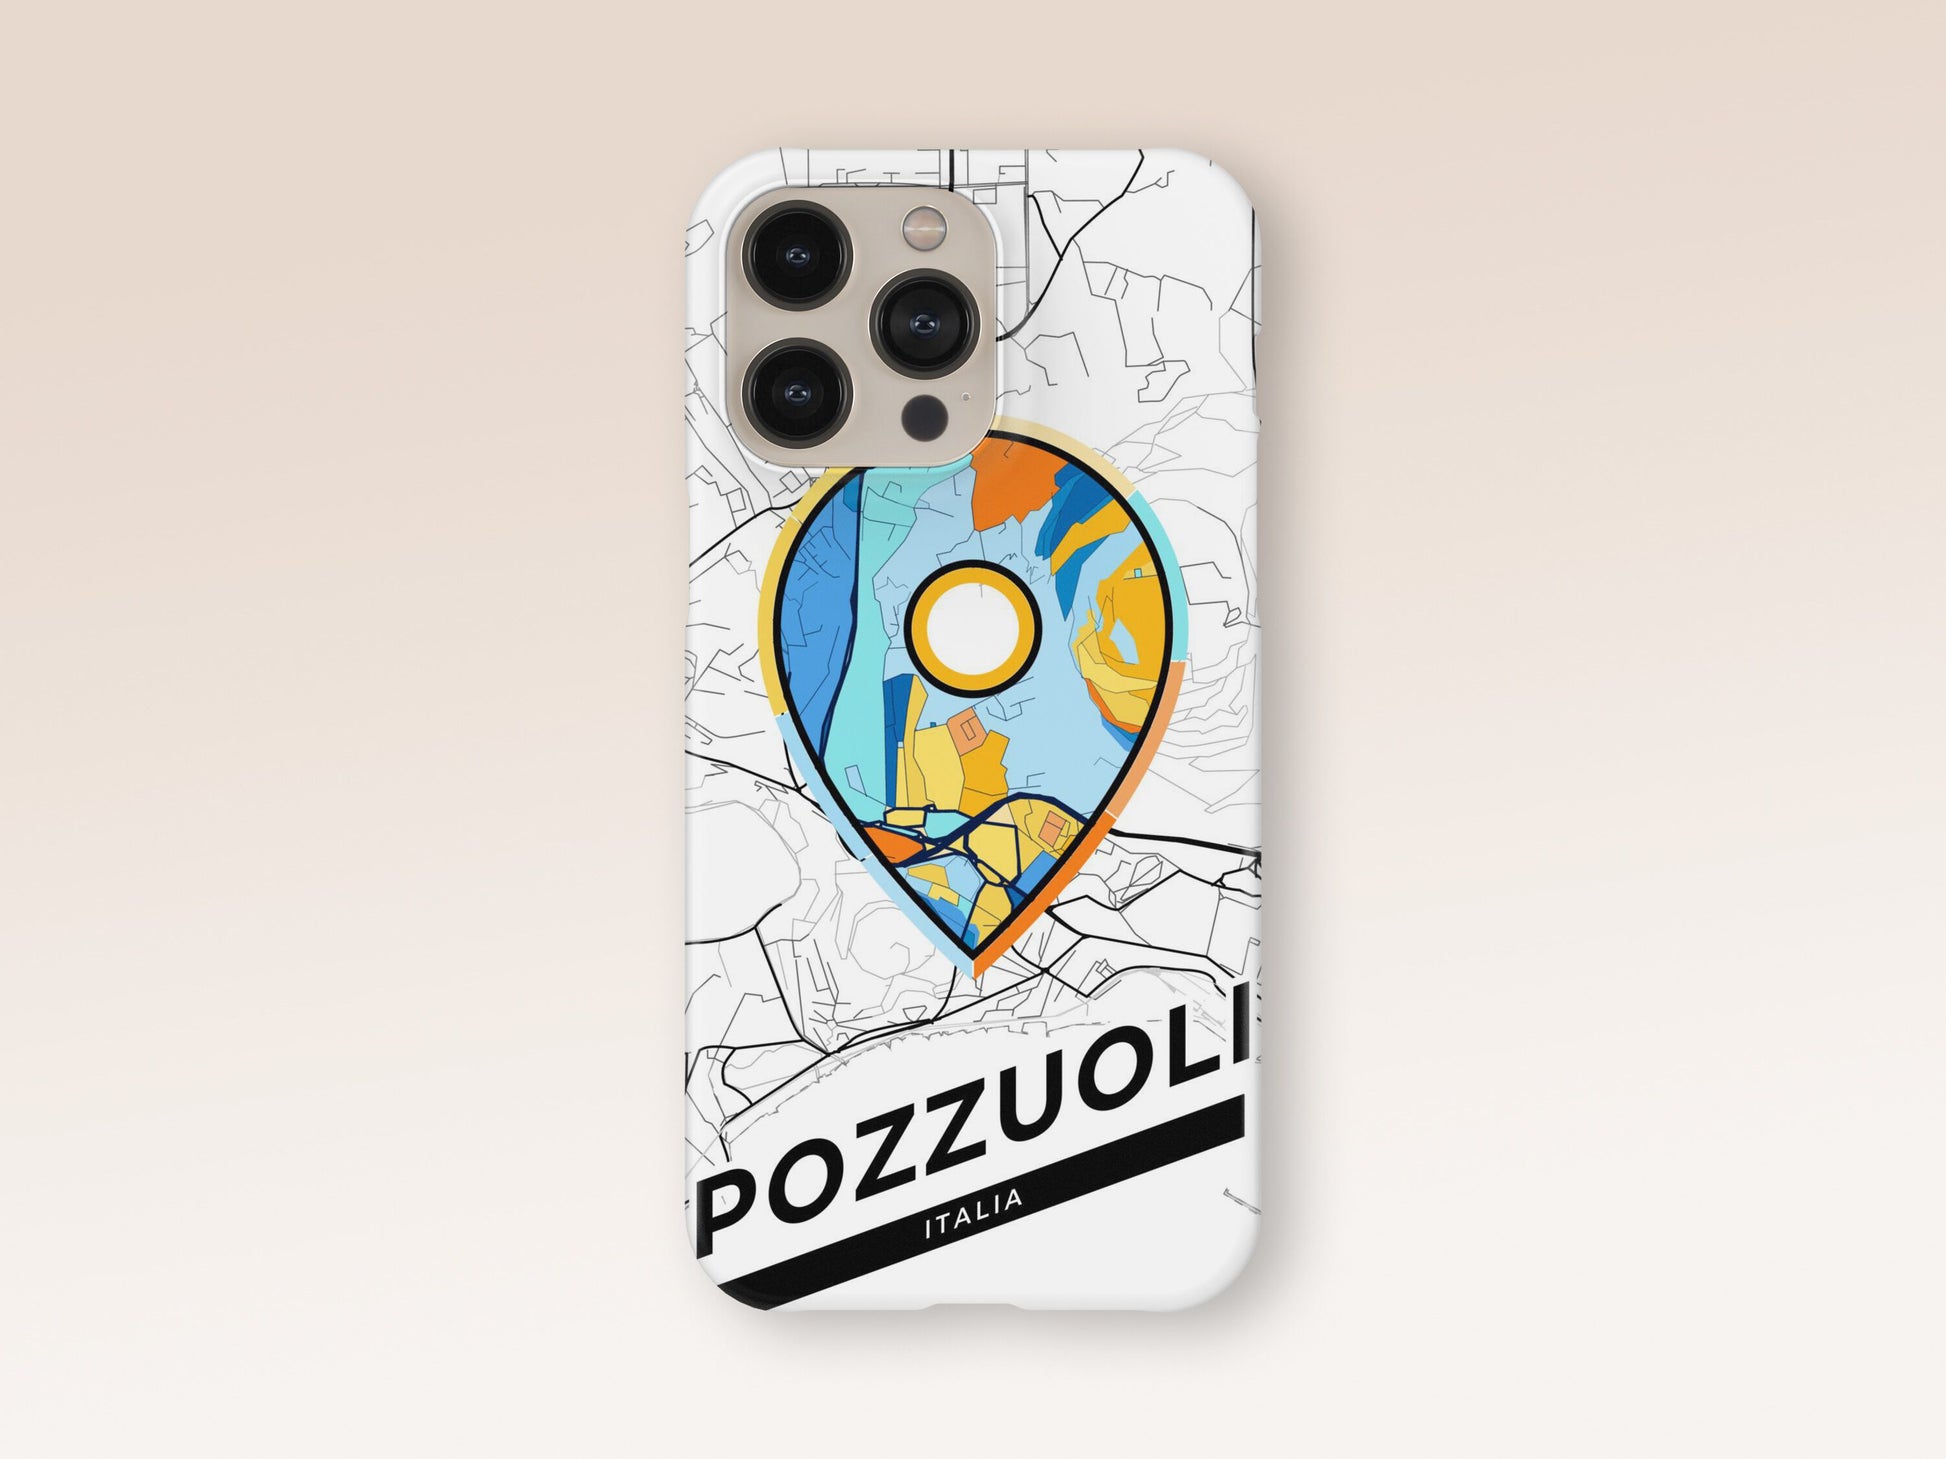 Pozzuoli Italy slim phone case with colorful icon. Birthday, wedding or housewarming gift. Couple match cases. 1